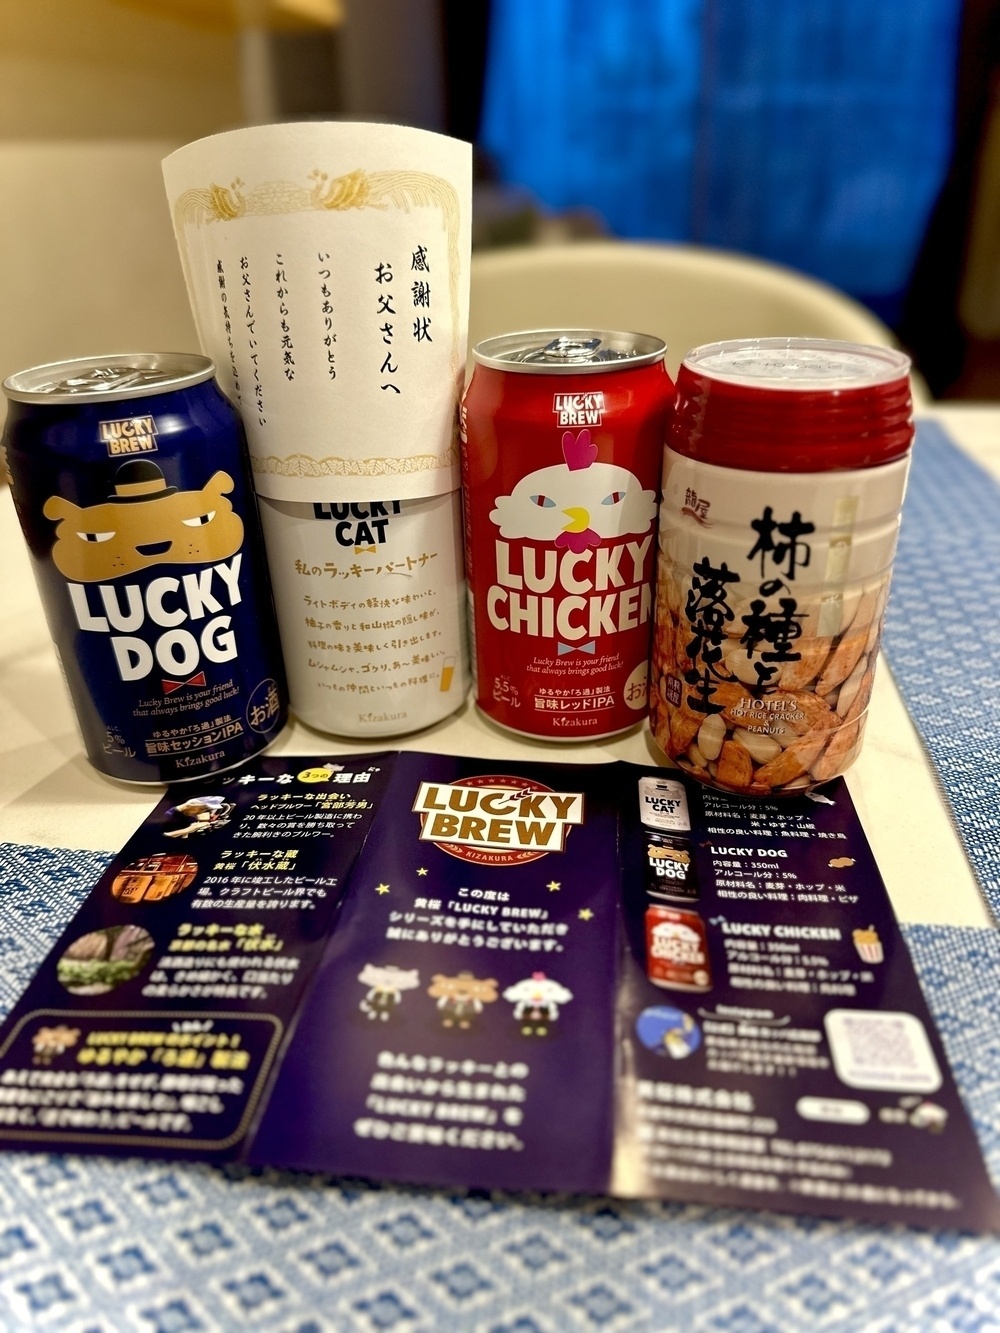 Several can beverages featuring "Lucky Dog", "Lucky Cat", and "Lucky Chicken" designs are displayed, with informational cards and a snack container in the background, all set on a blue-checkered tablecloth.